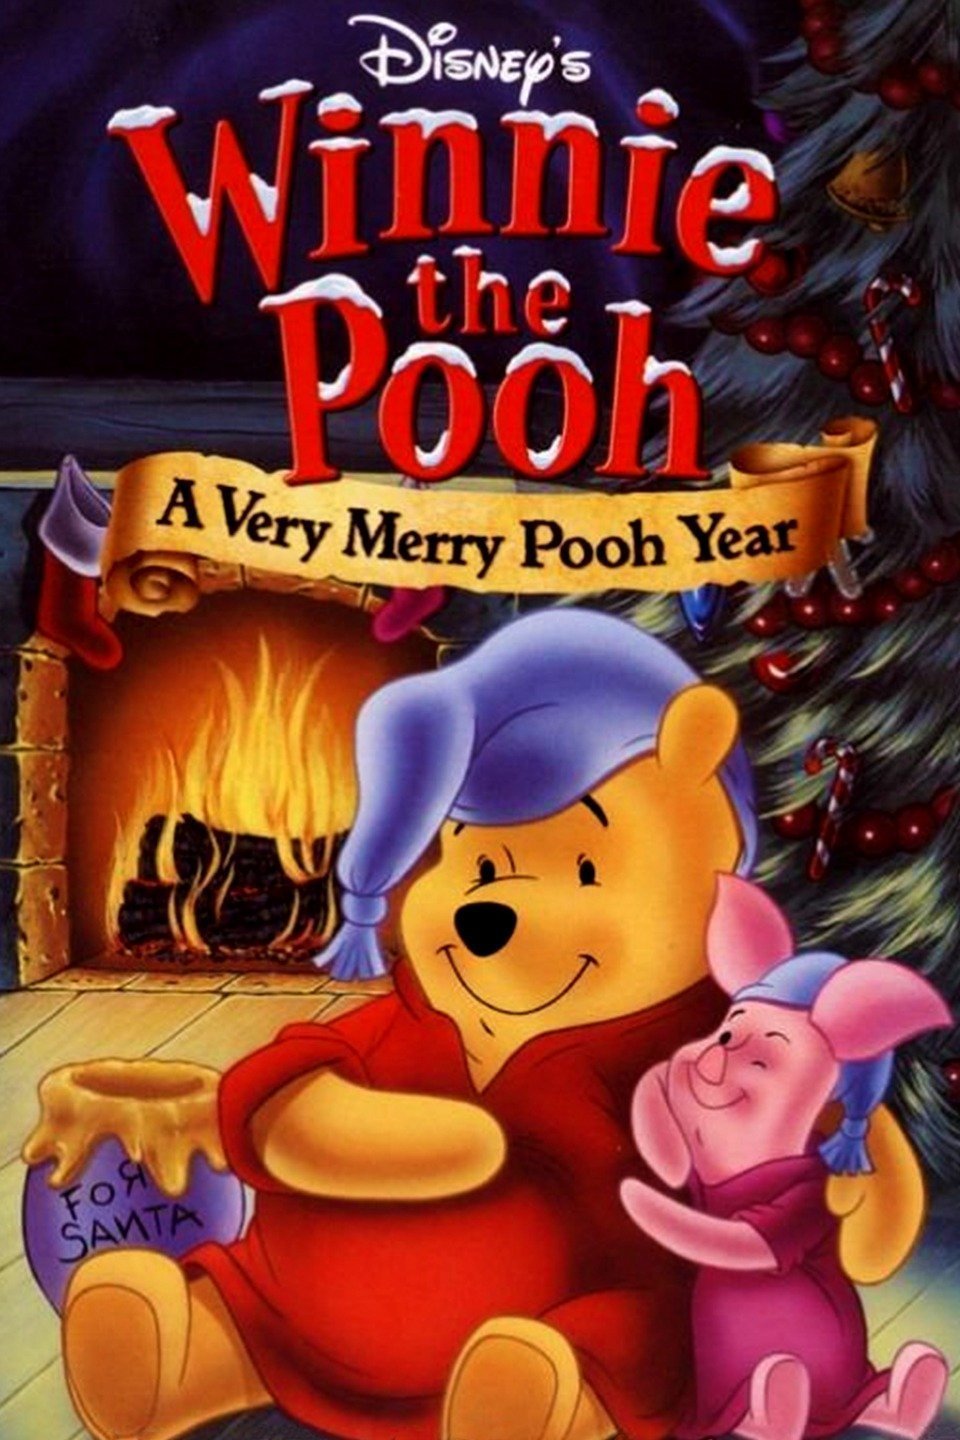 Poster of the movie Winnie the Pooh: A Very Merry Pooh Year